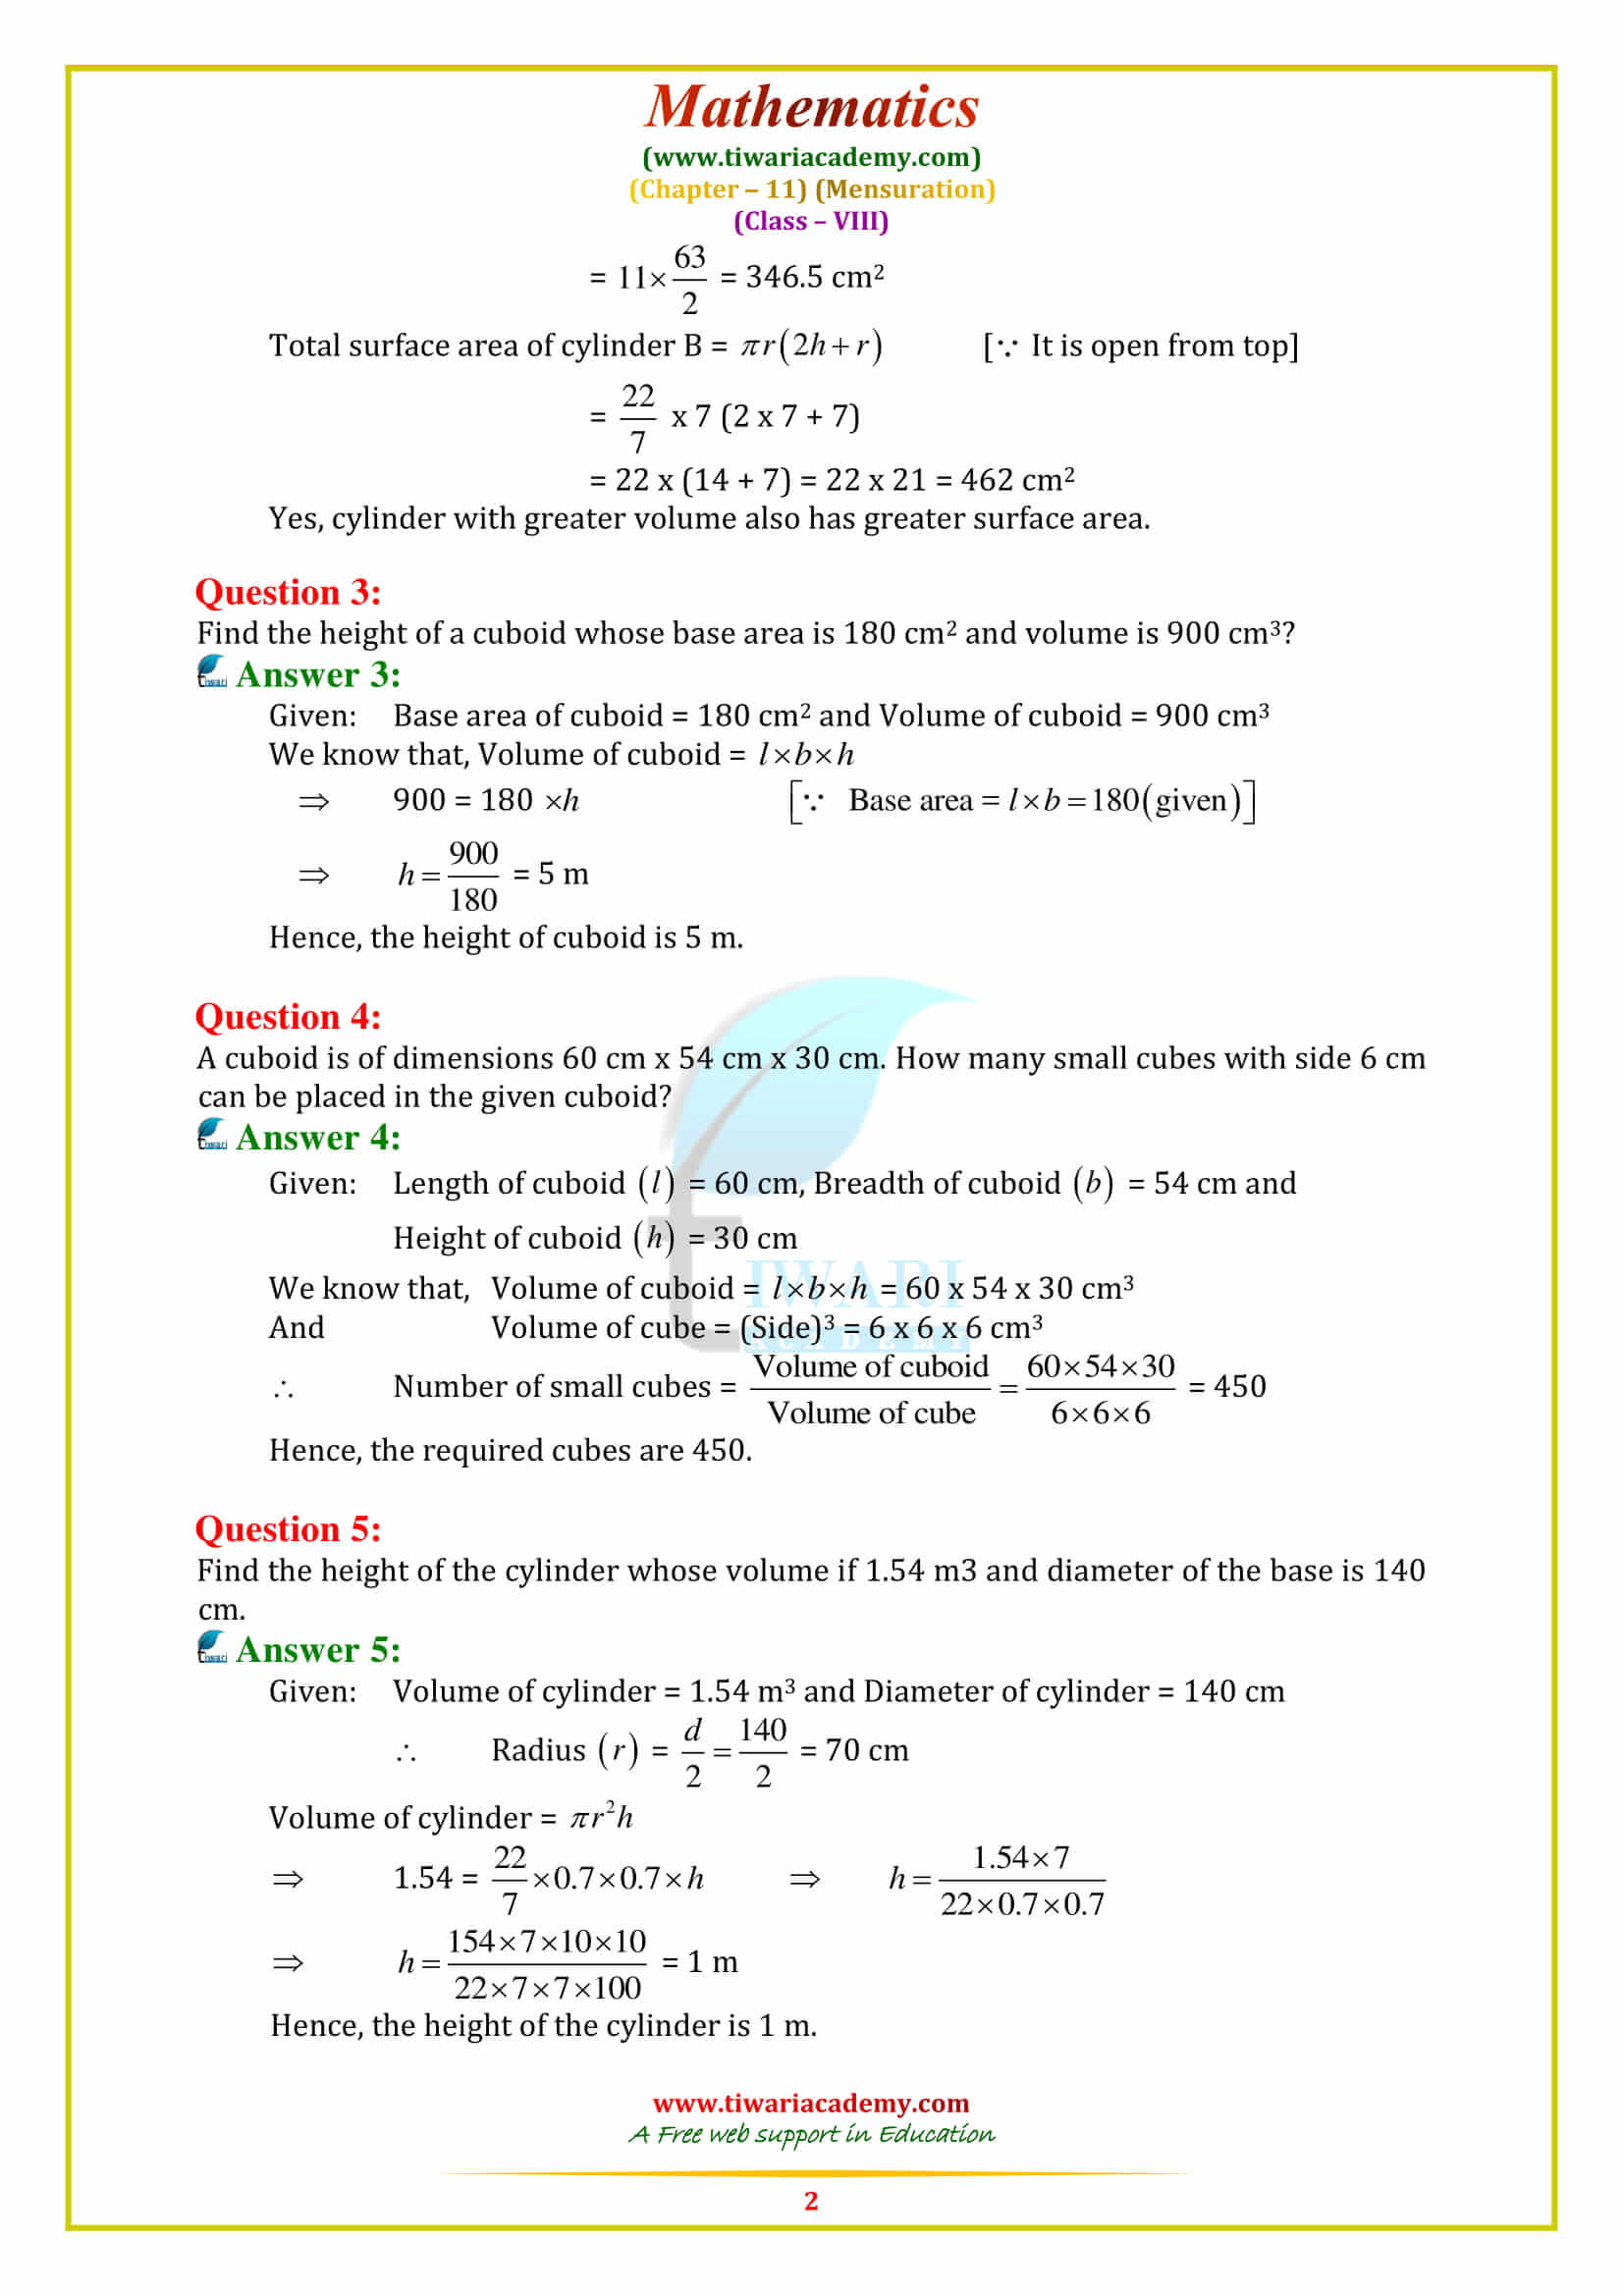 NCERT Solutions for Class 8 Maths Chapter 11 Exercise 11.4 in pdf form